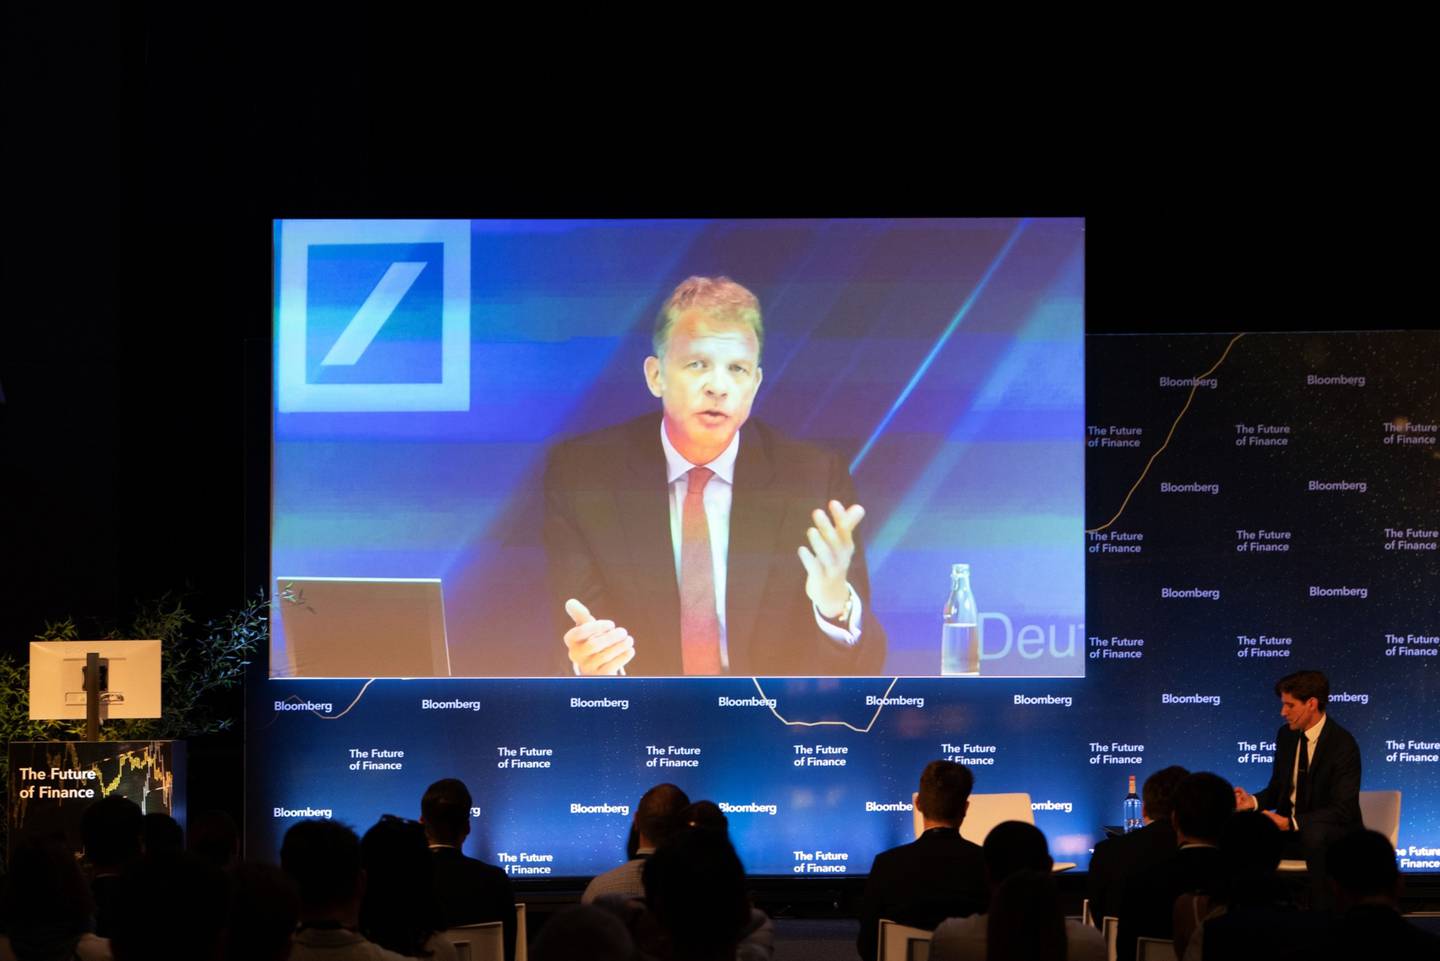 Christian Sewing, chief executive of Deutsche Bank, appears via video link during the Future of Finance conference in Frankfurt, Germany, on June 22, 2022. Bloomberg